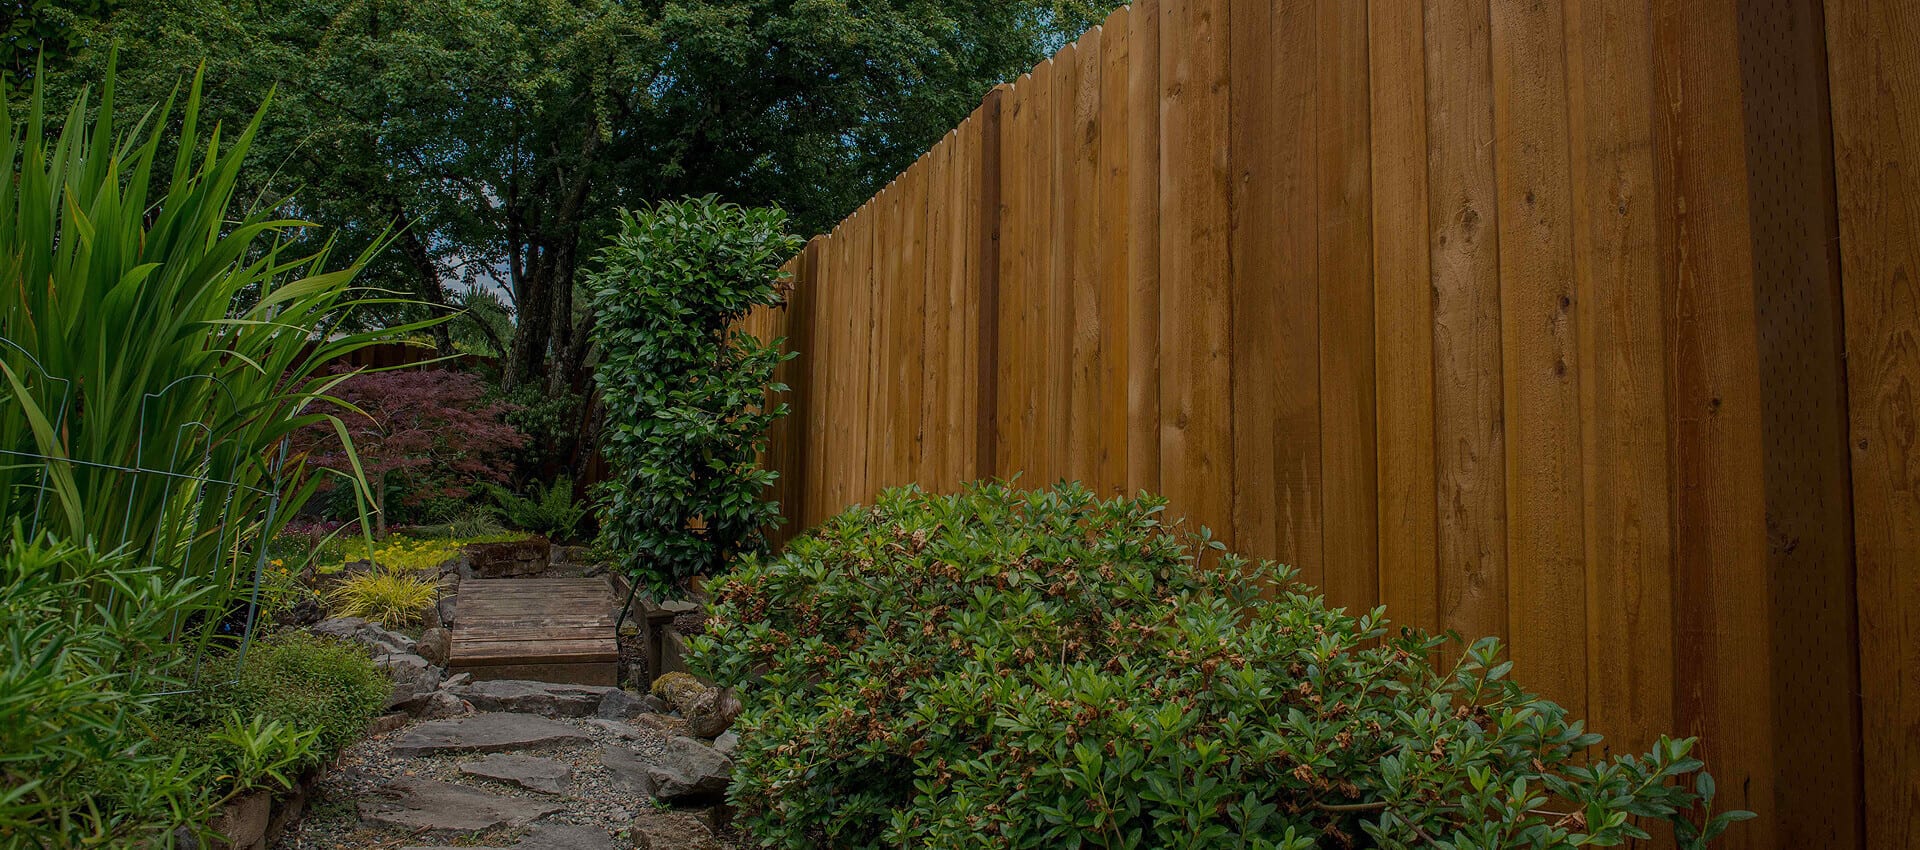 3 Secrets to Working with Insurance for your Fence or Deck Repairs